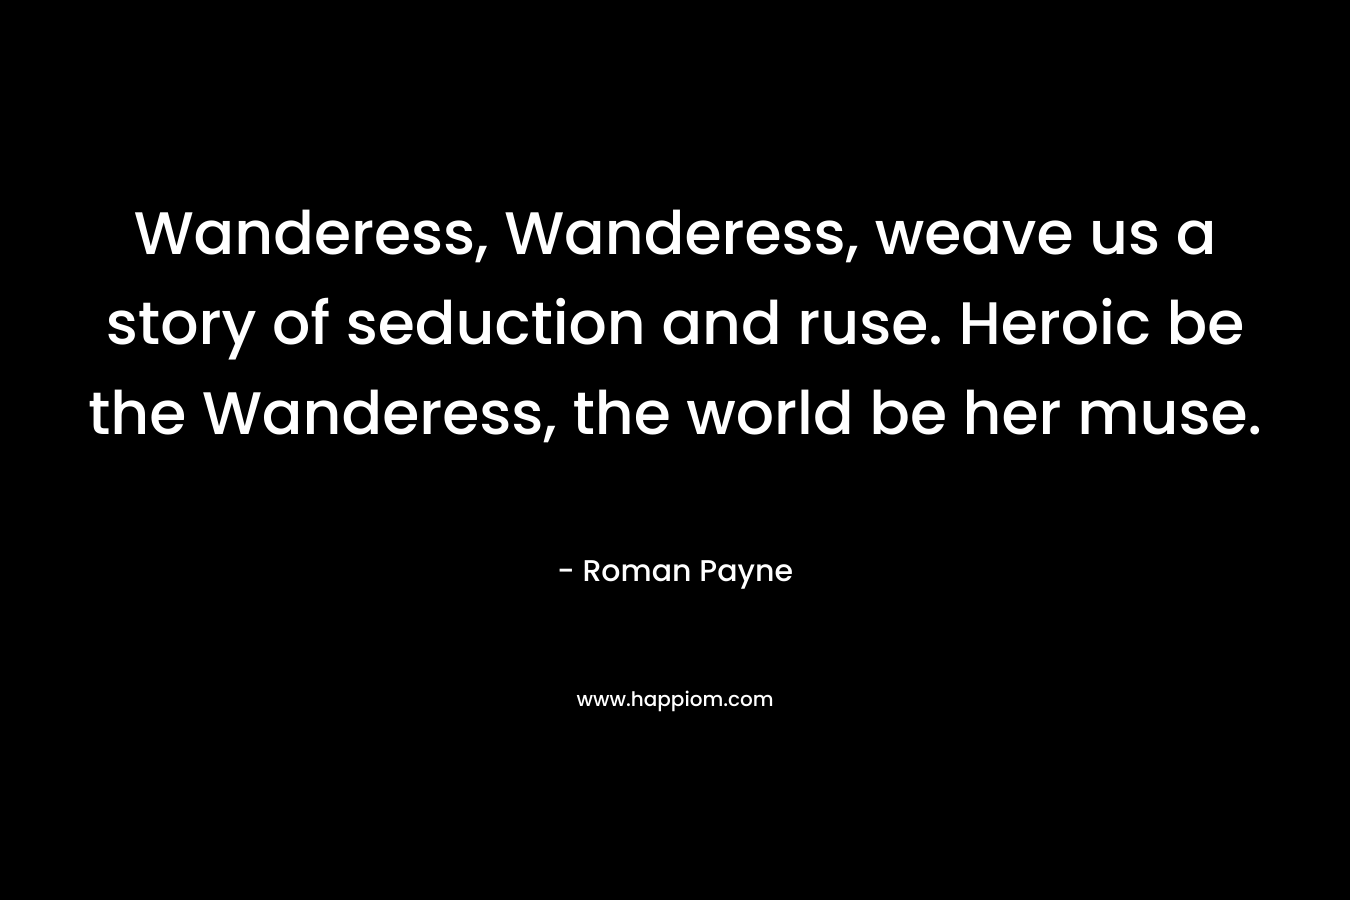 Wanderess, Wanderess, weave us a story of seduction and ruse. Heroic be the Wanderess, the world be her muse. – Roman Payne